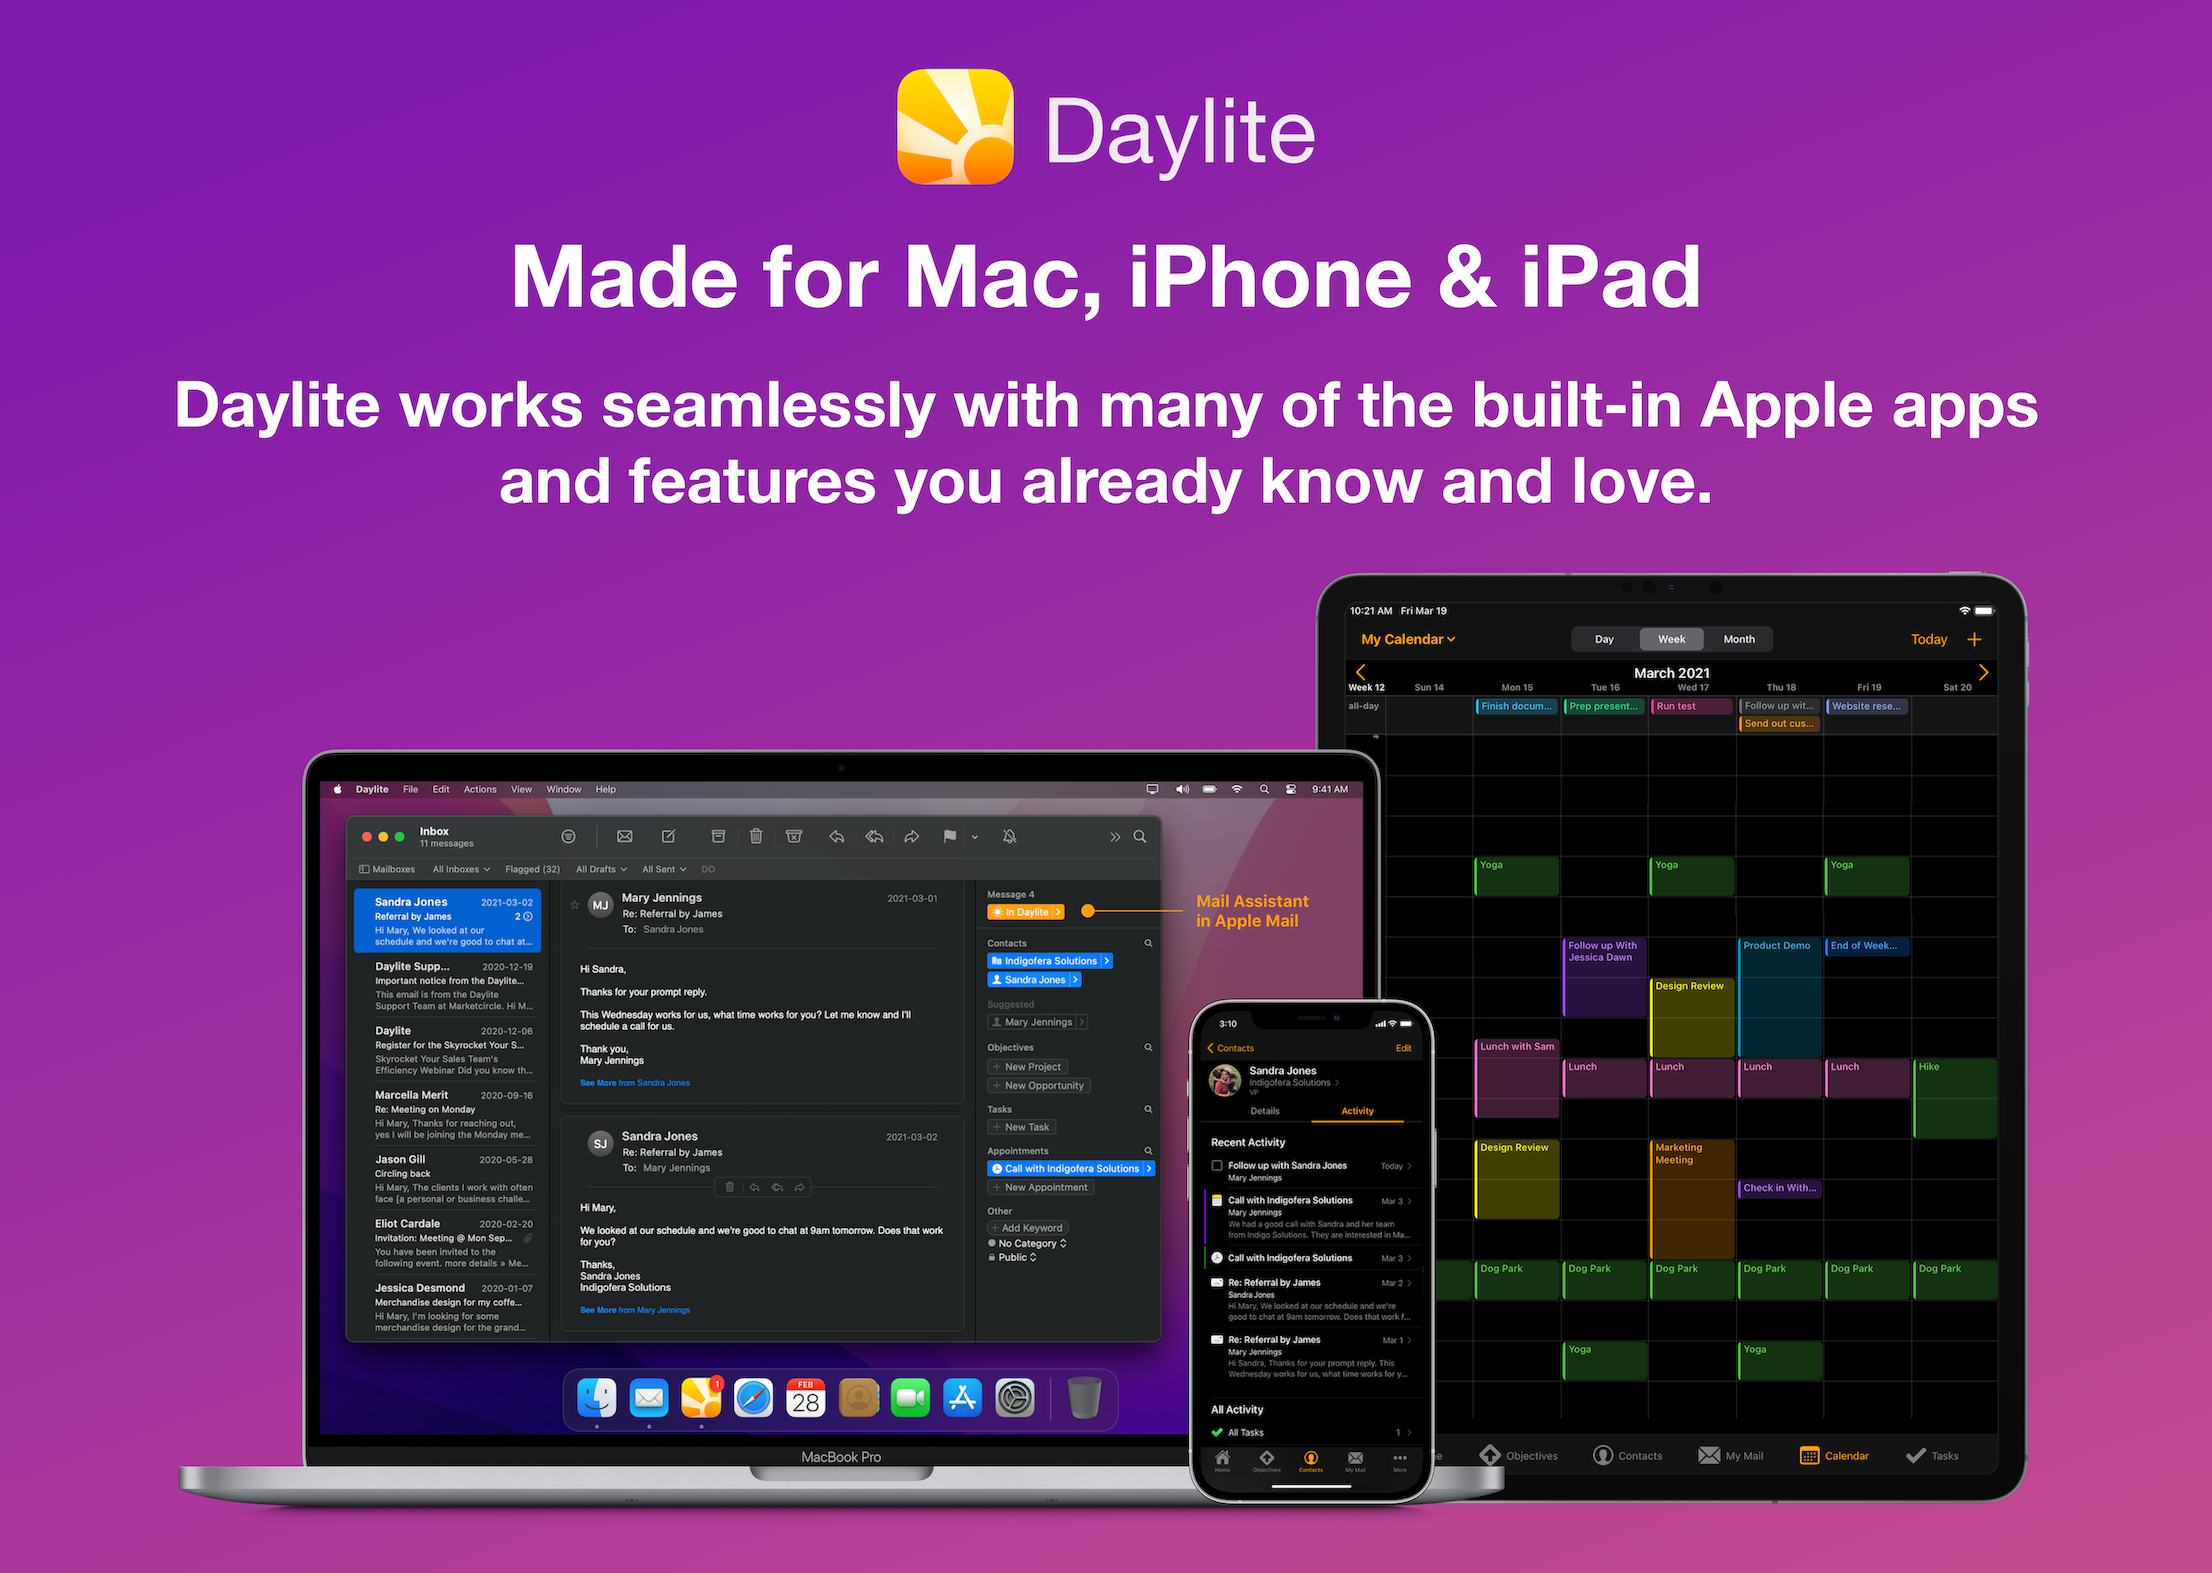 Designed specifically for macOS and iOS, Daylite adapts to support you and your team through every step of your growth journey.